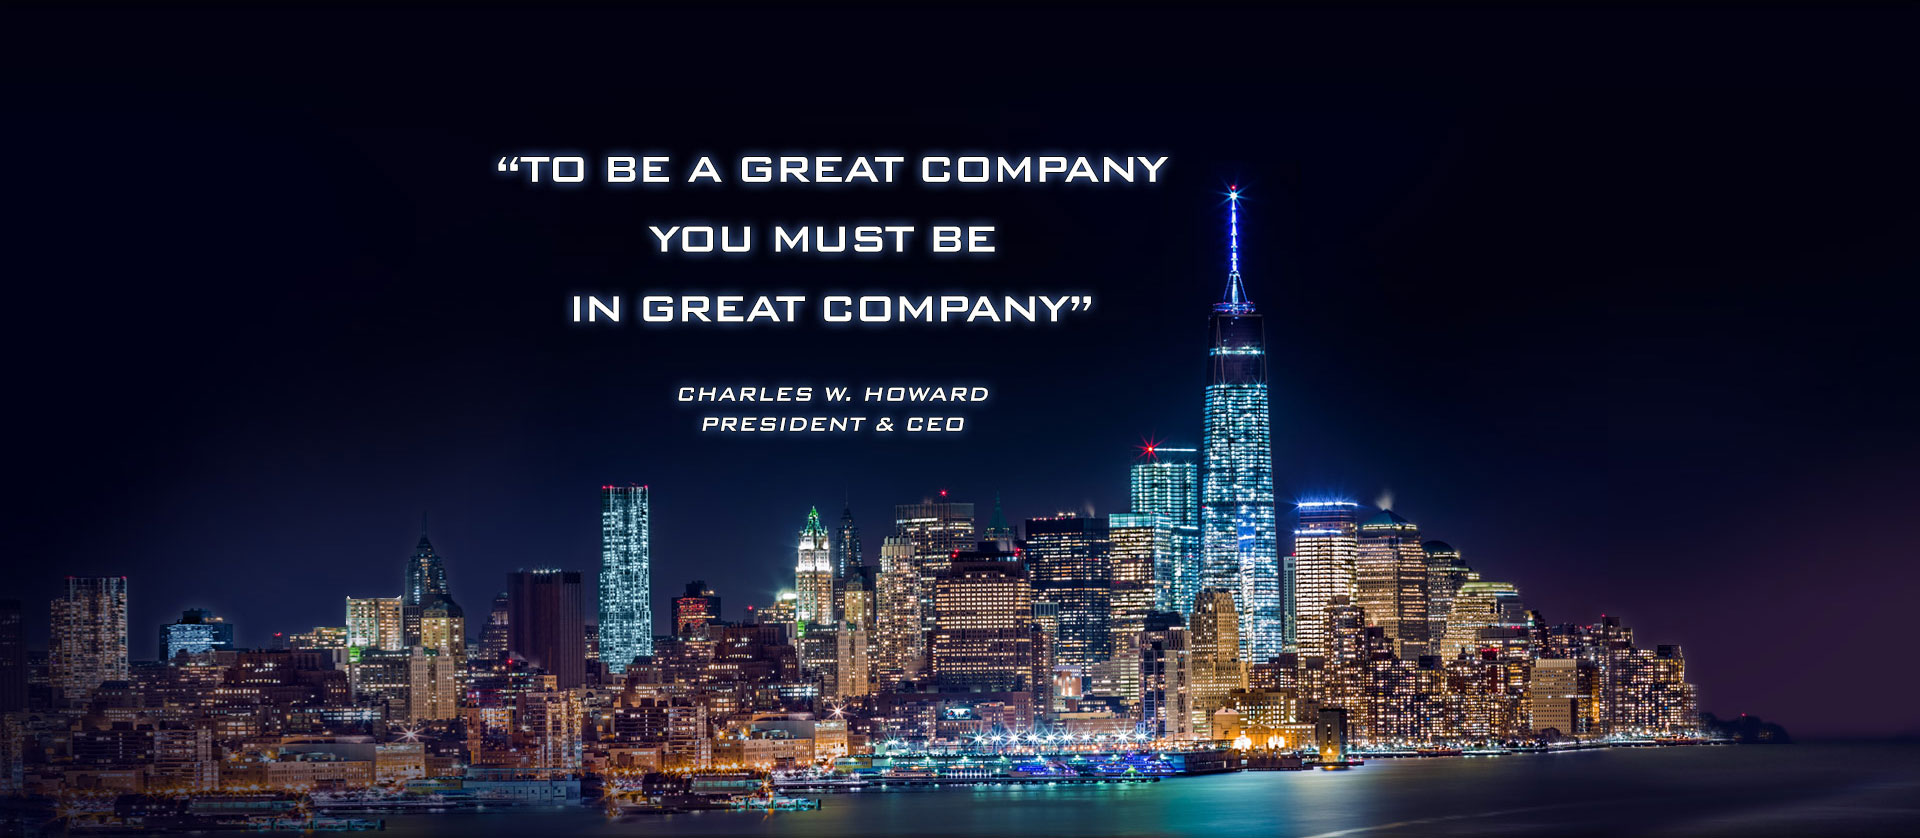 To Be a Great Company You Must Be In Great Company - Charles W. Howard, President and CEO